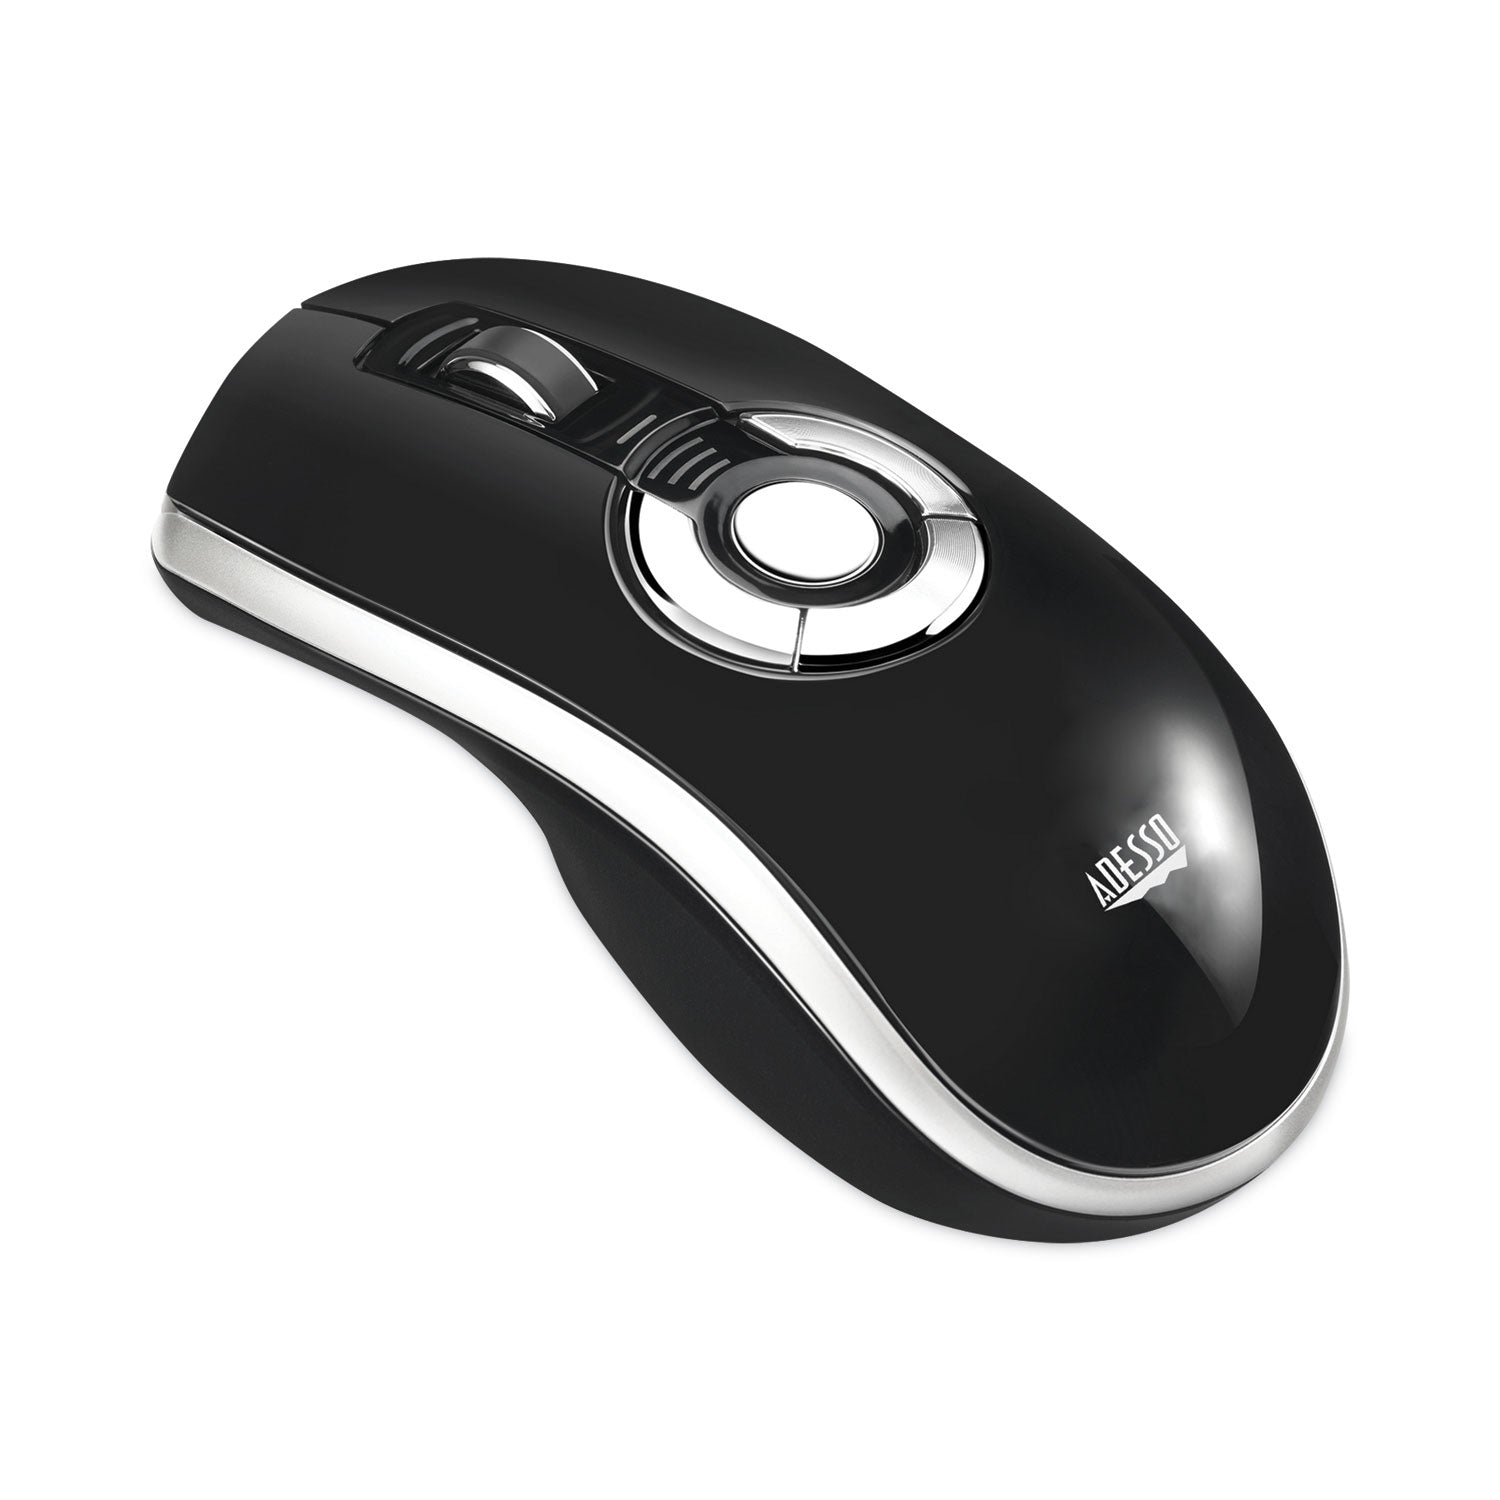 air-mouse-elite-wireless-presenter-mouse-24-ghz-frequency-100-ft-wireless-range-left-right-hand-use-black_adeimousep20 - 2